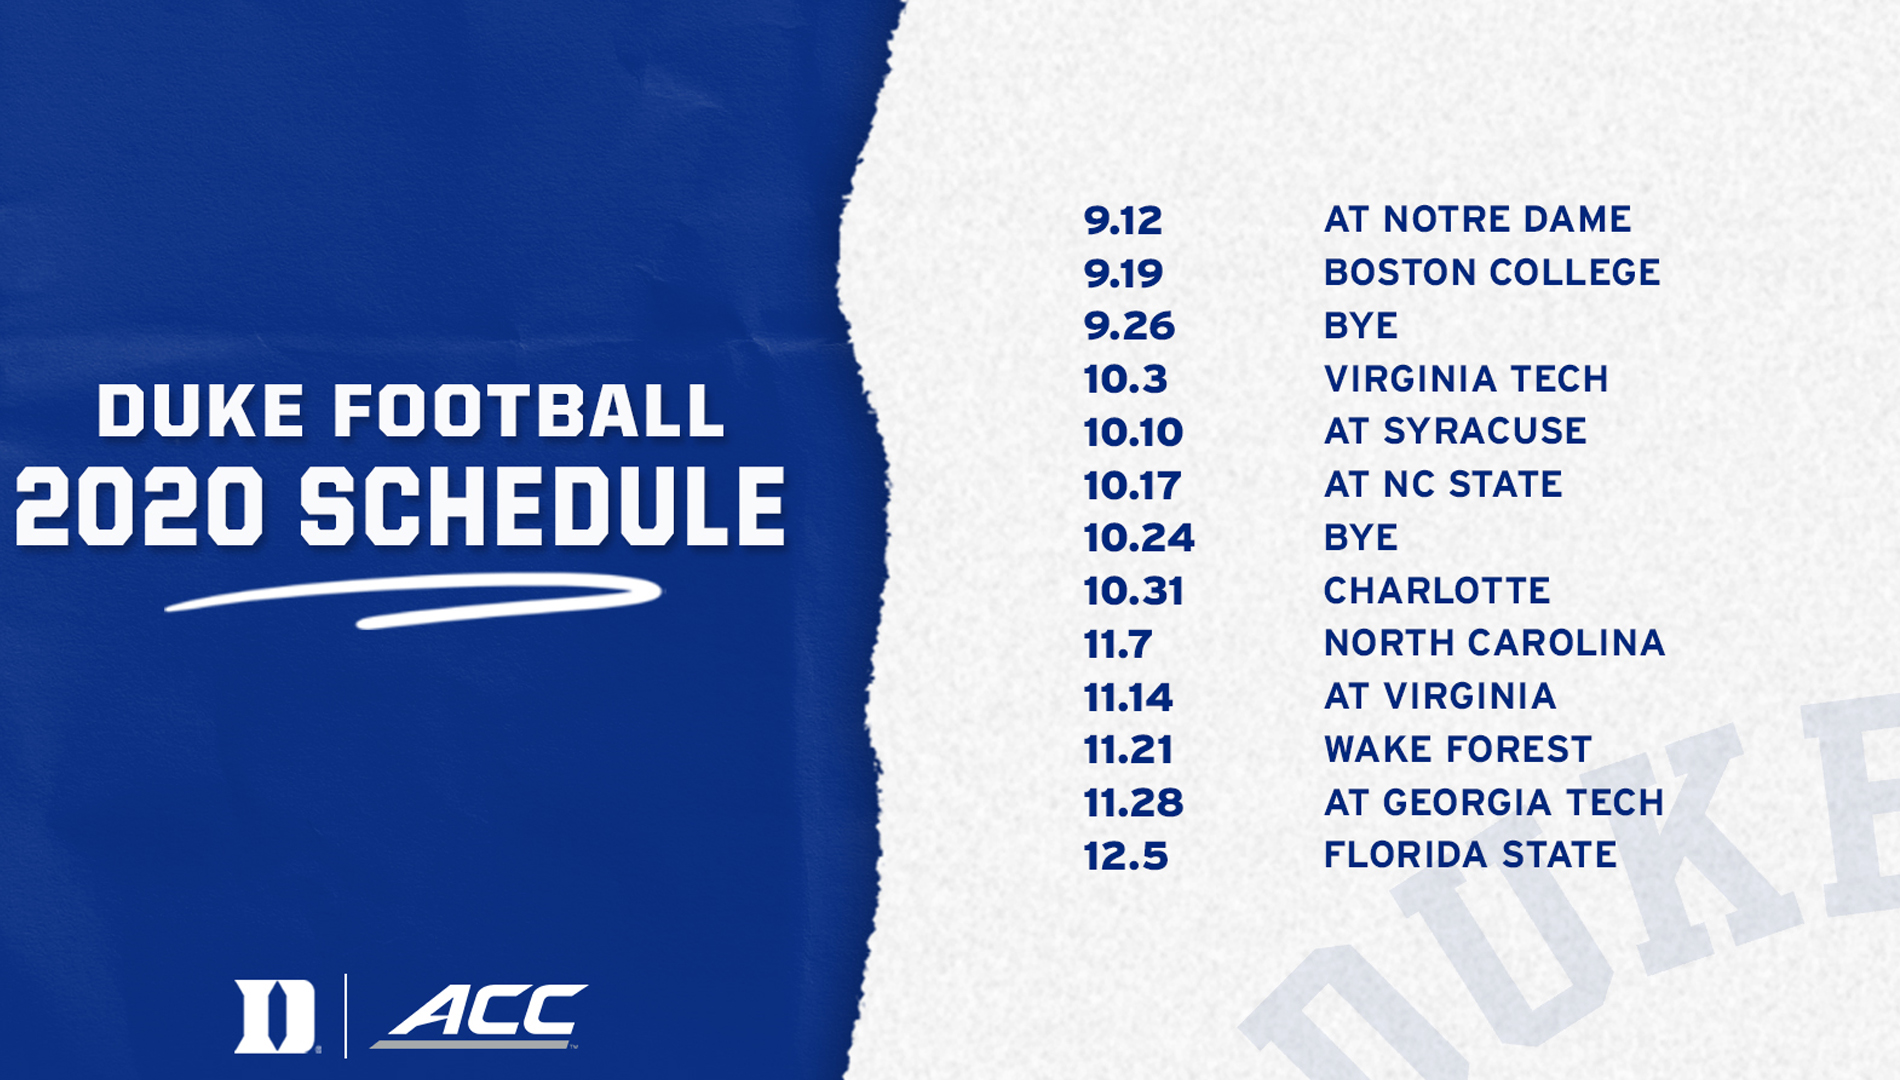 The ACC announced Duke's amended football schedule for the upcoming 2020 season. 